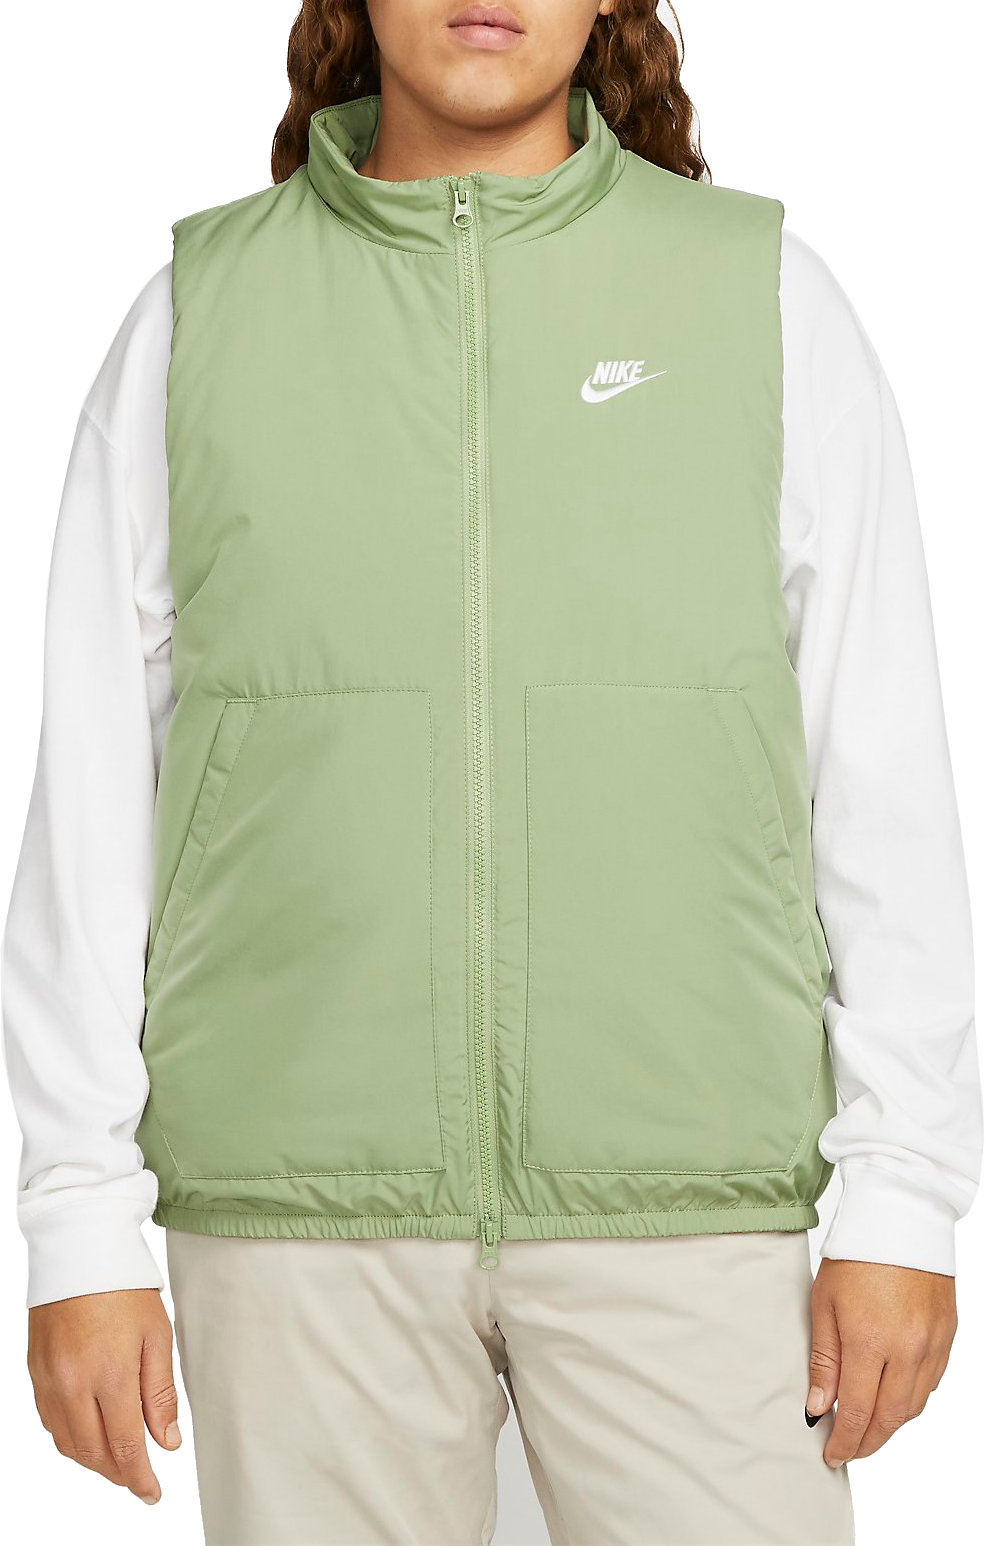 Nike Therma-FIT Club - Men's Woven Insulated Gilet